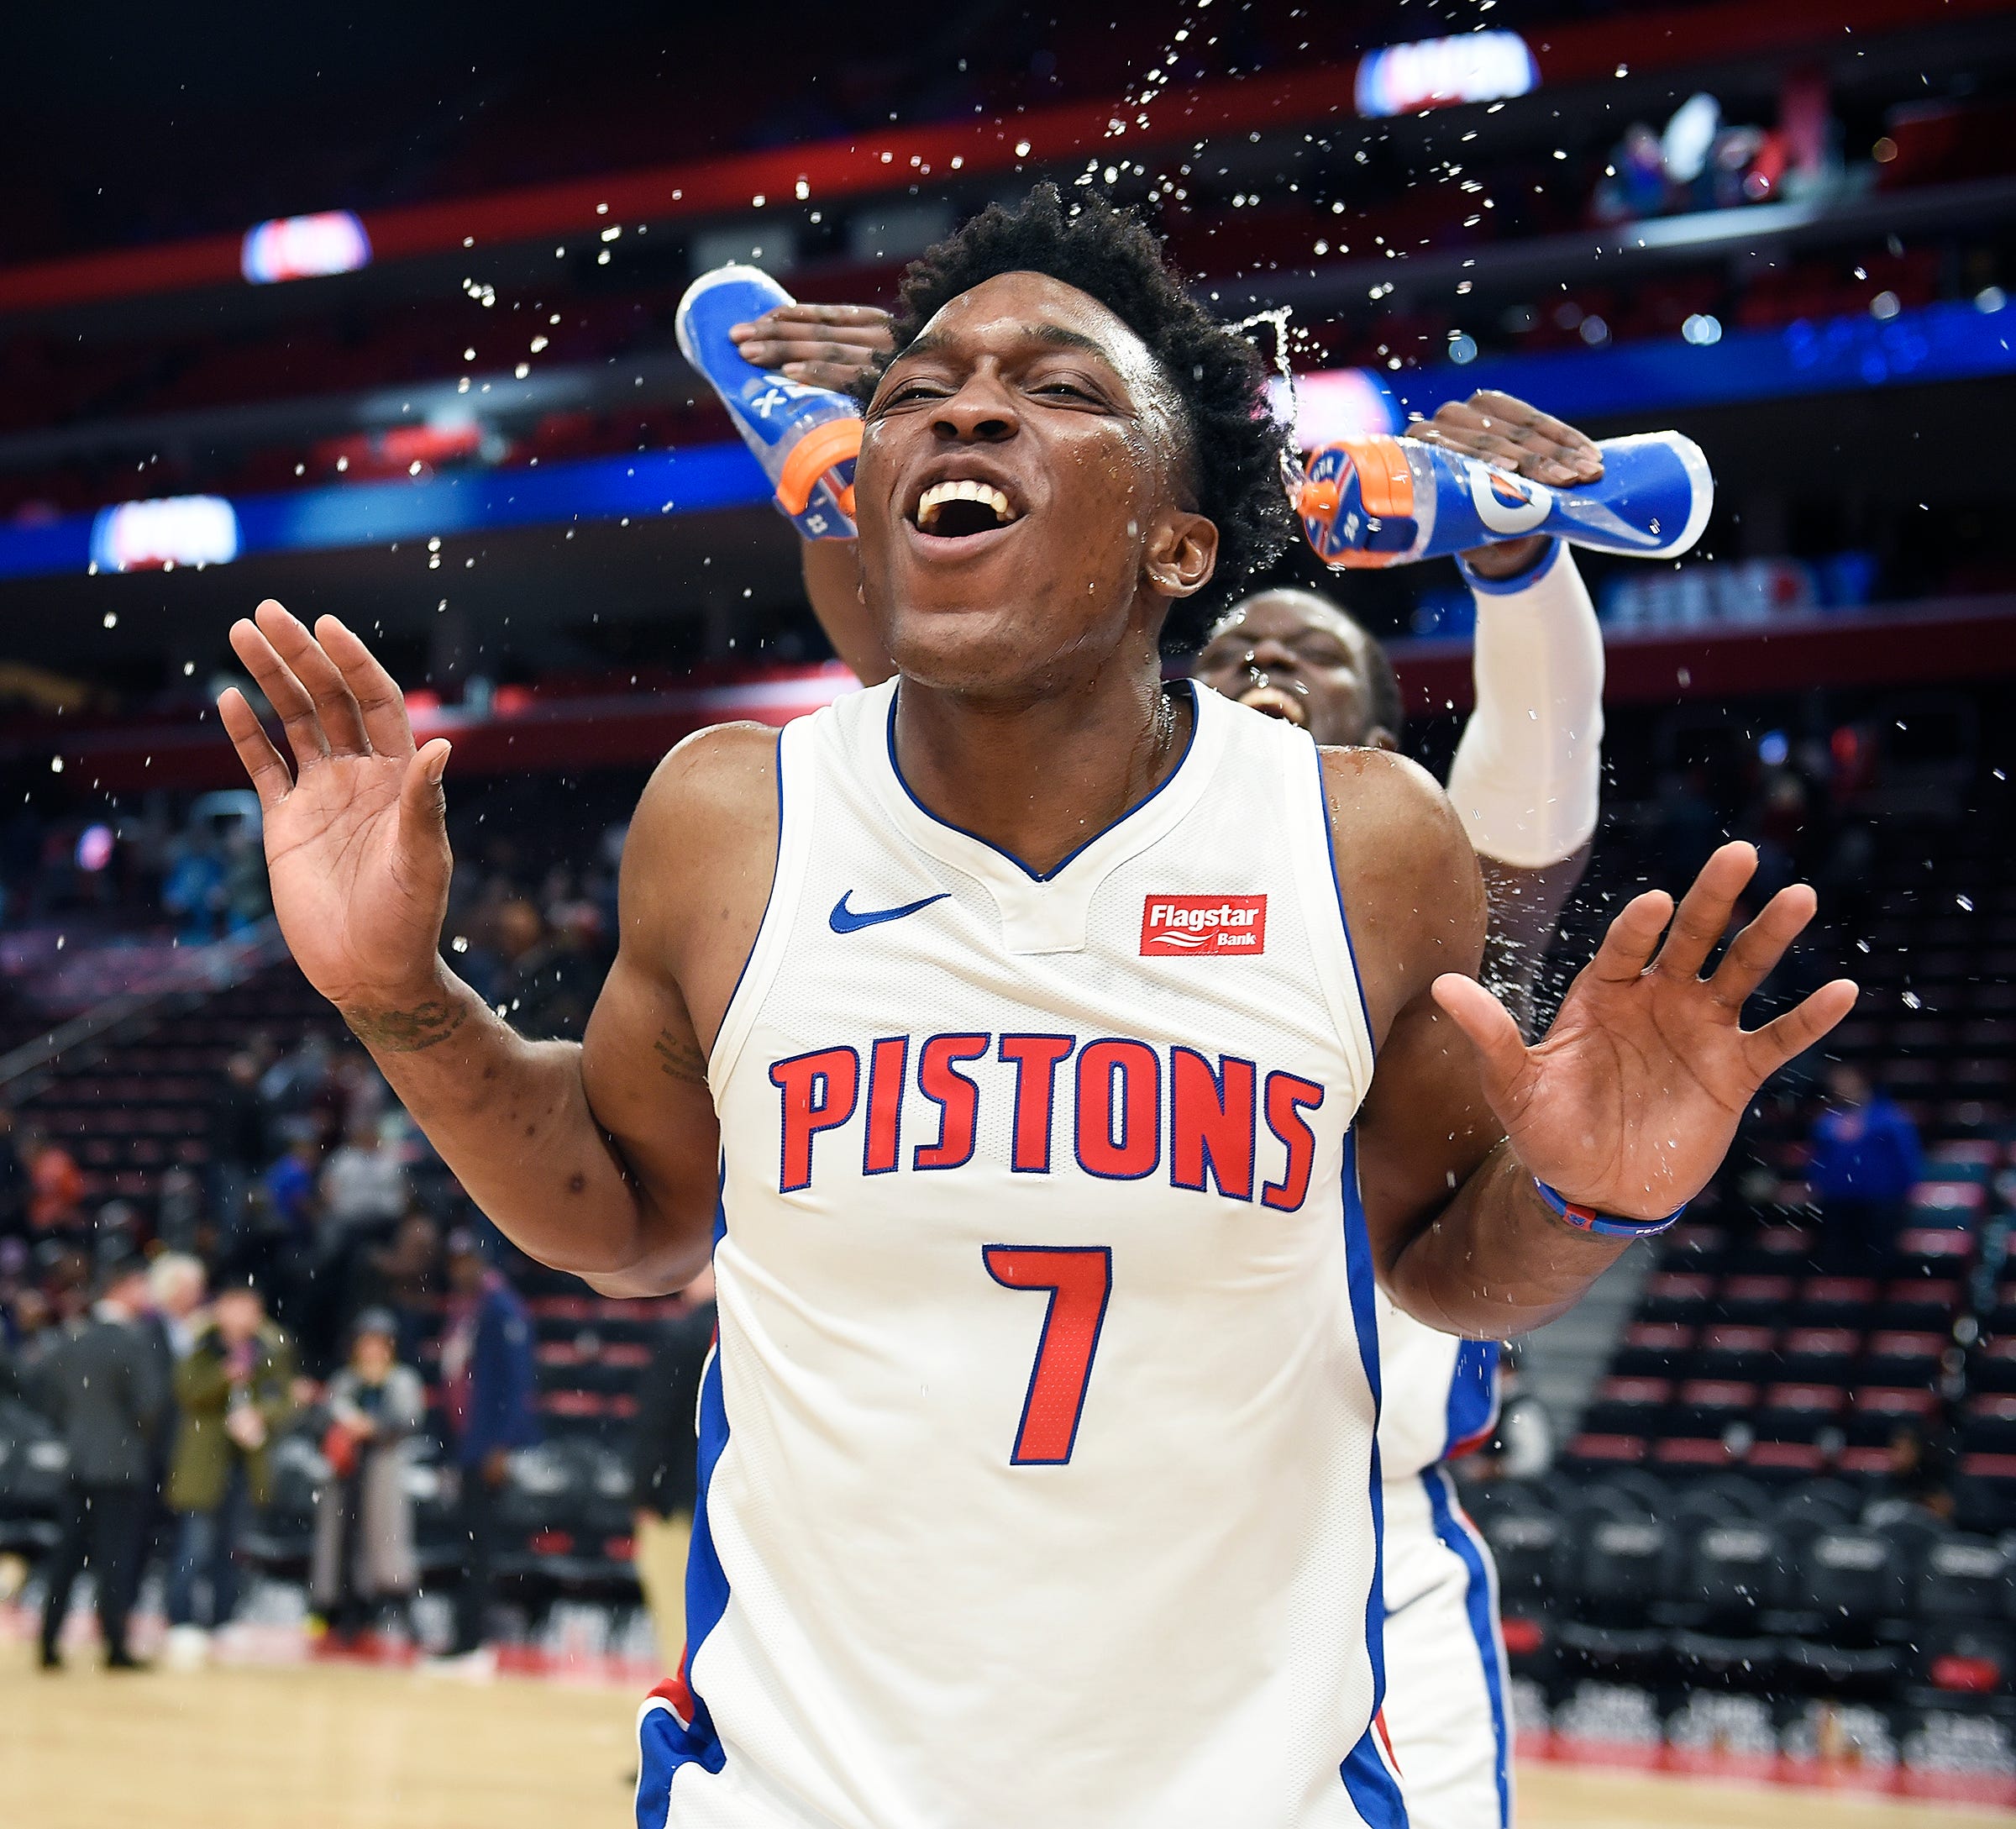 Pistons' Reggie Jackson sprays Stanley Johnson with water during his postgame interview. Johnson had 21 points and 4 rebounds.